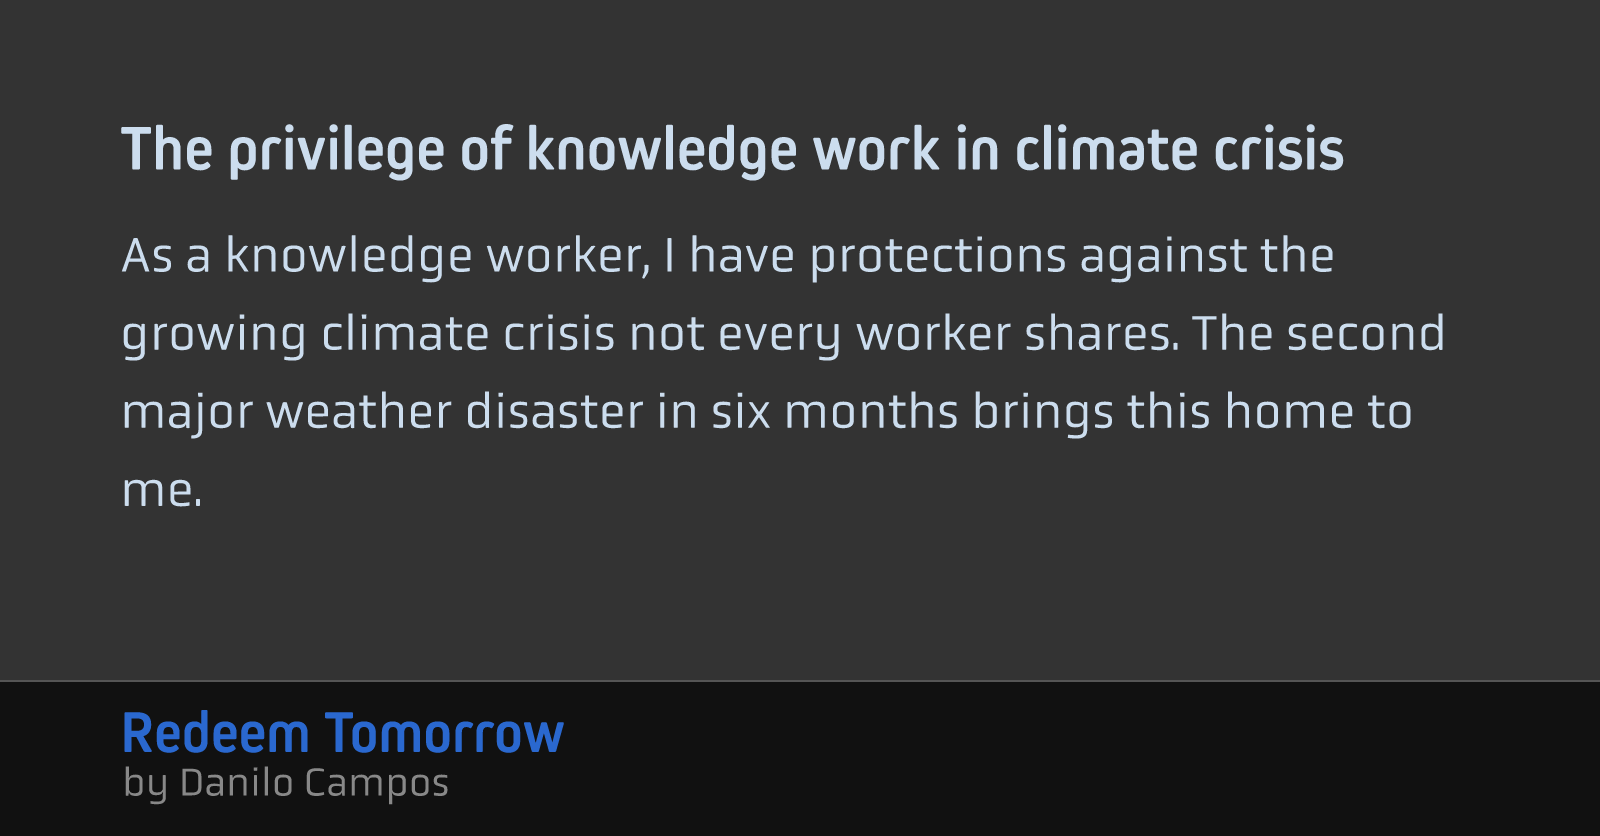 The privilege of knowledge work in climate crisis